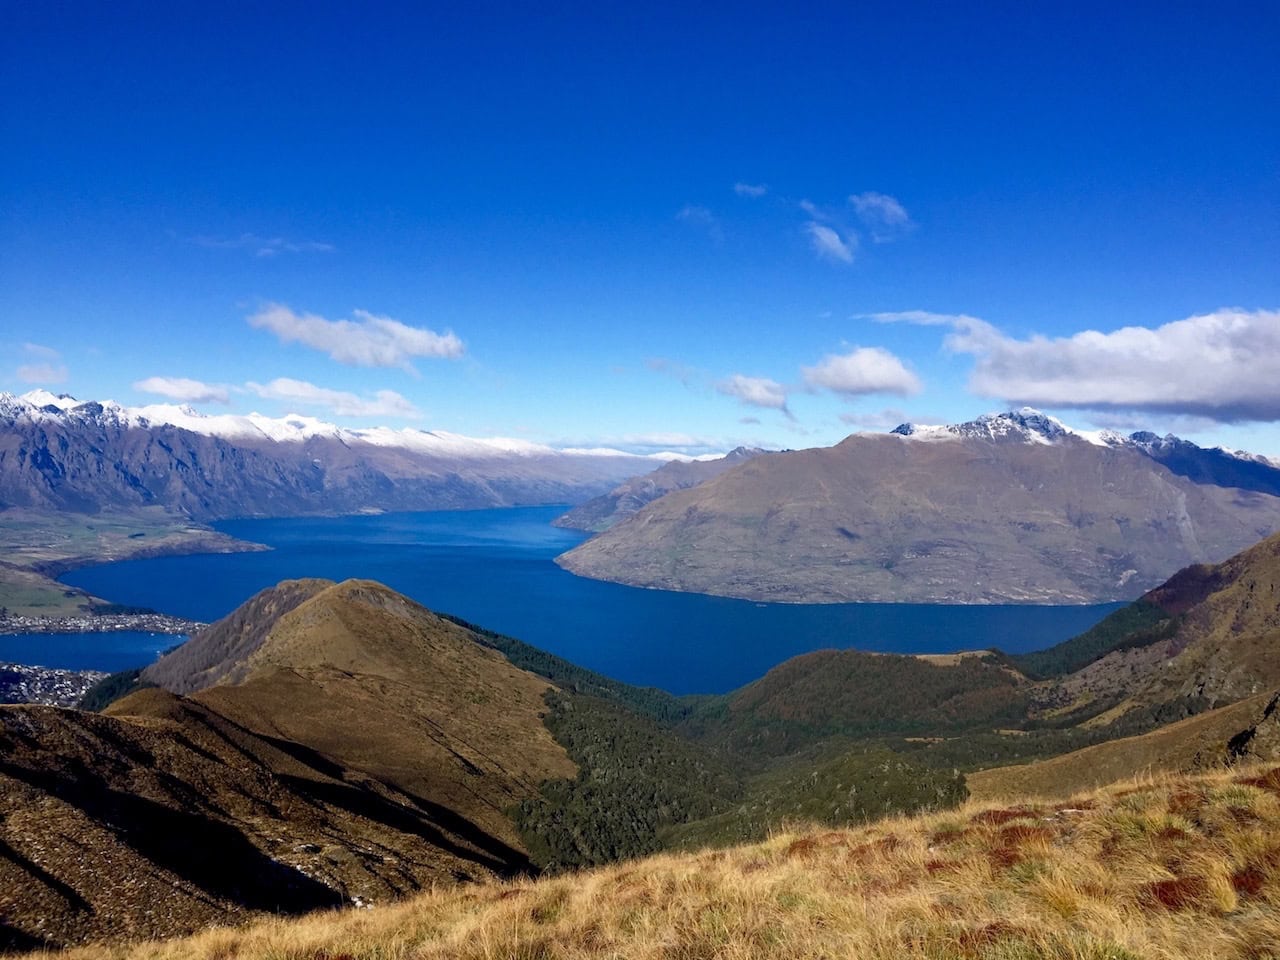 One Day In Queenstown, New Zealand | We Are Travel Girls